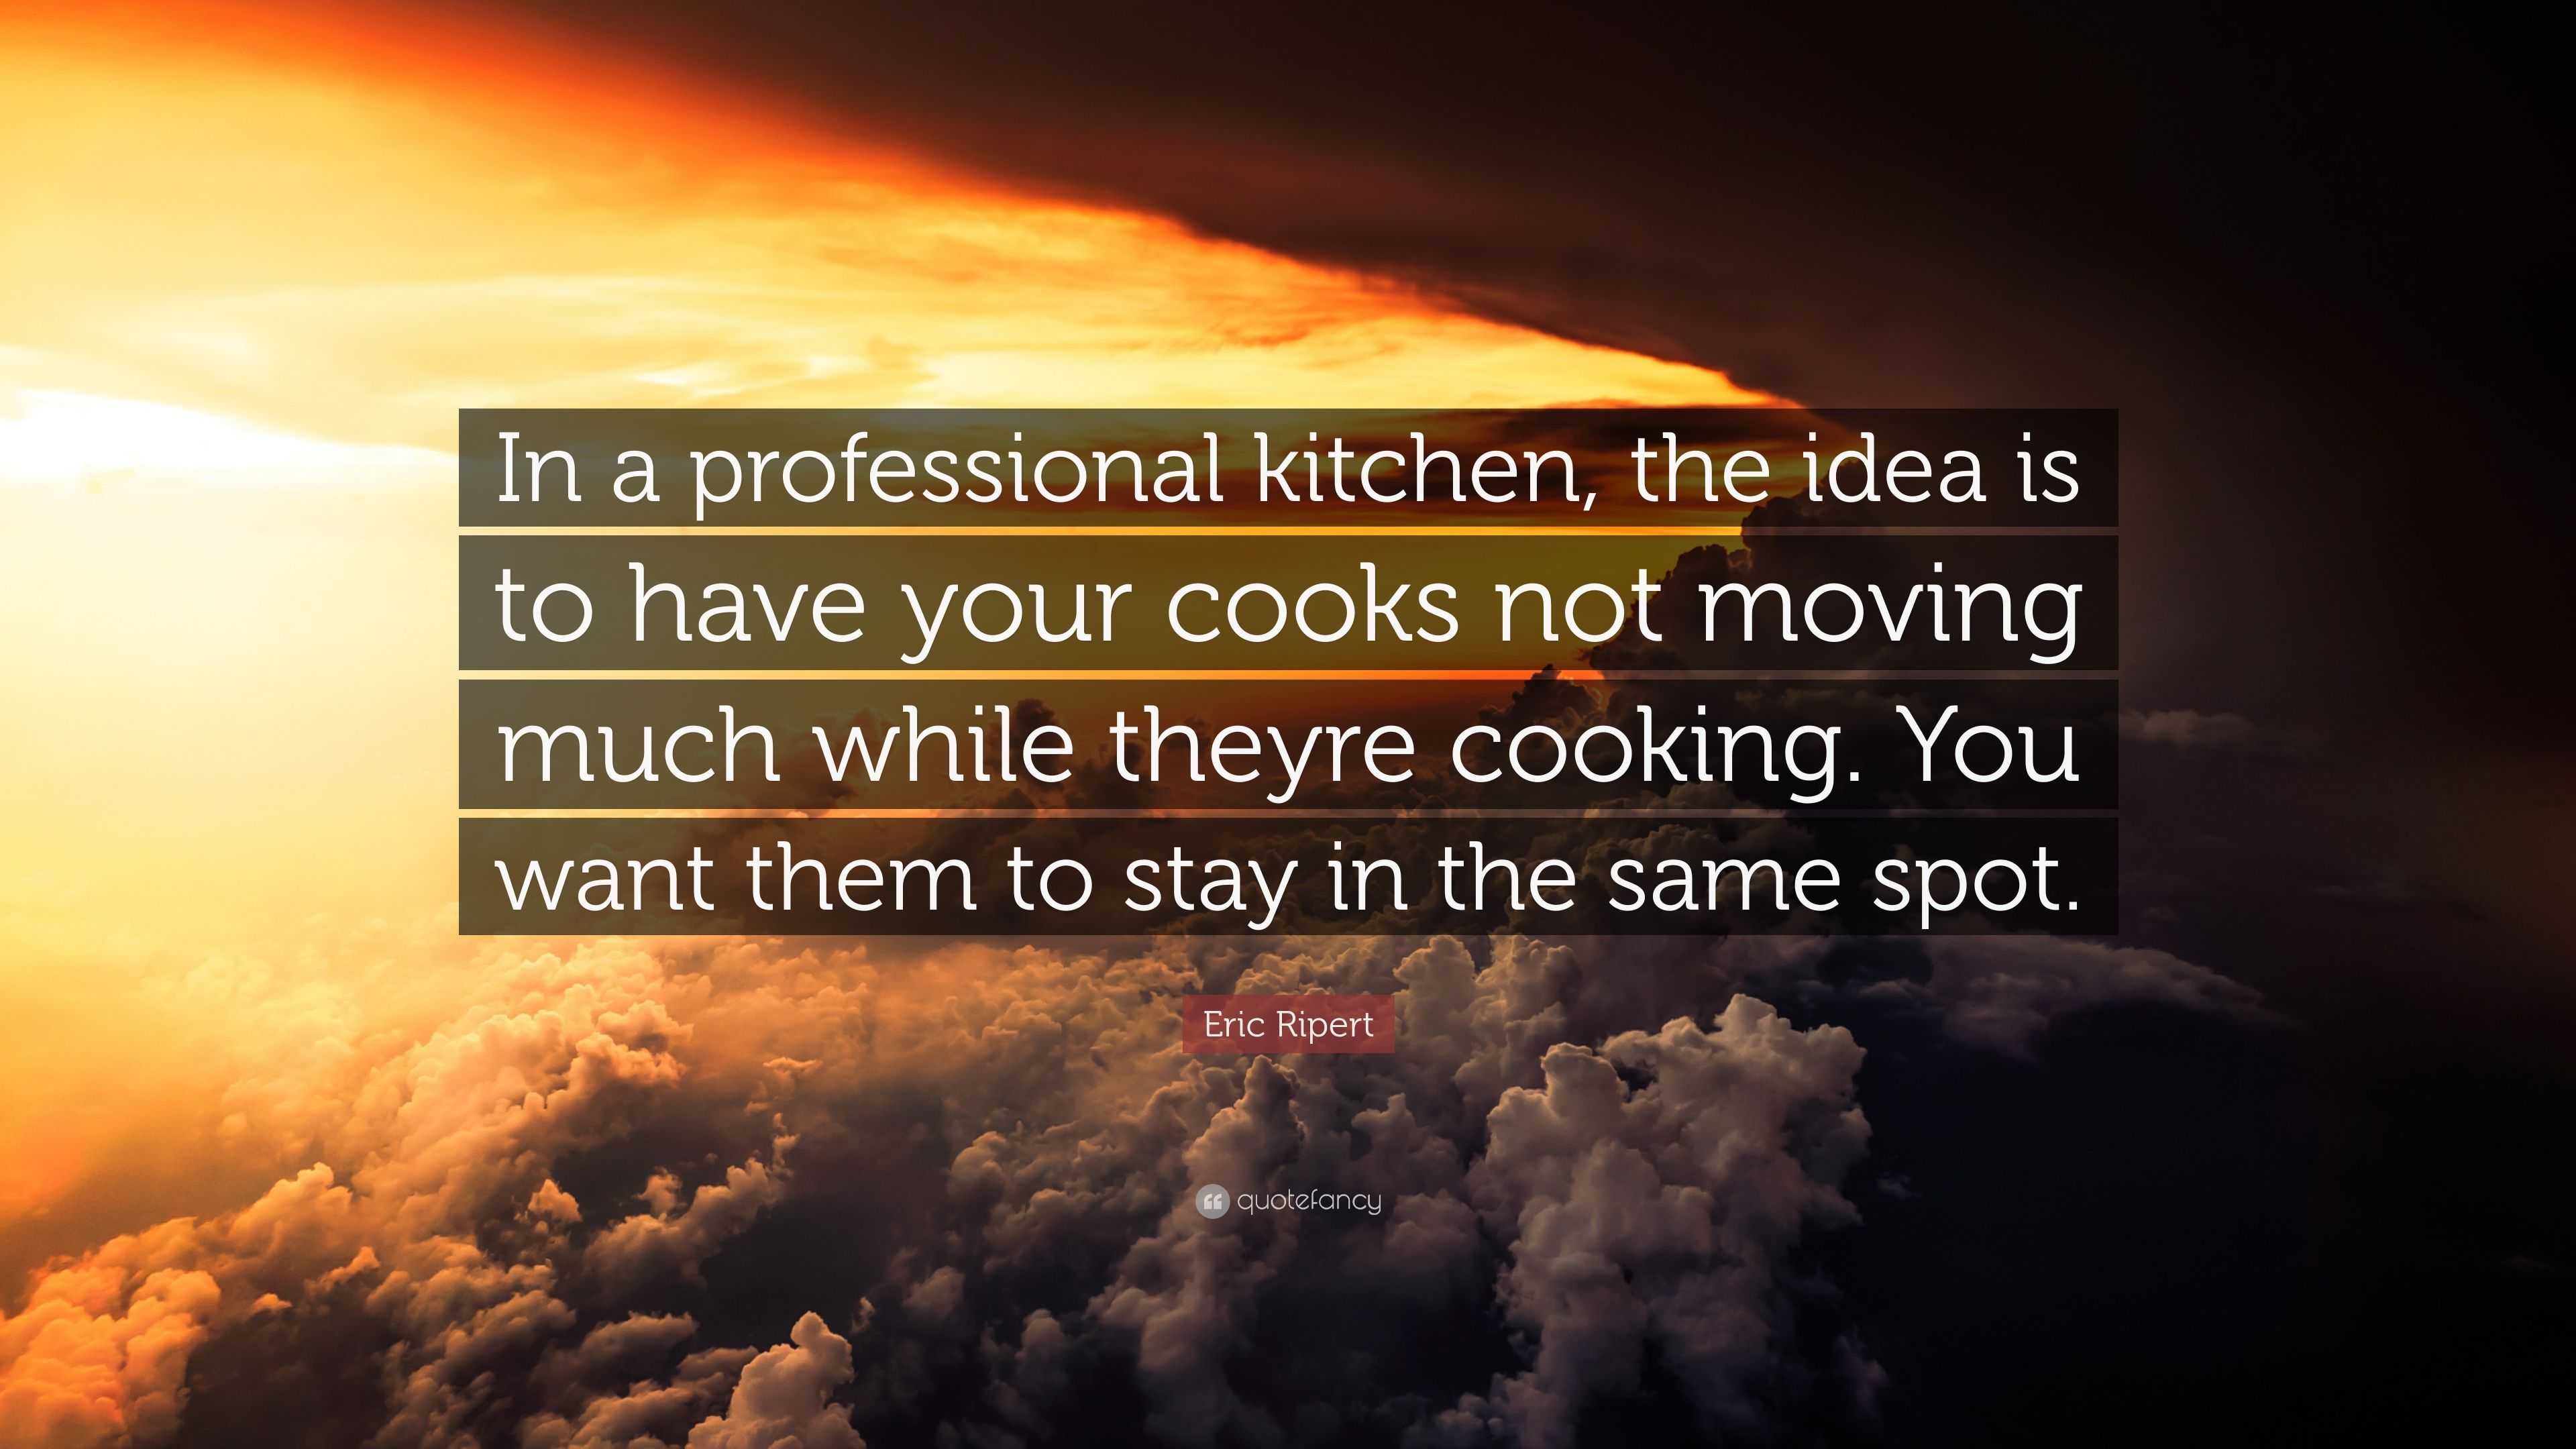 I've been out of the professional kitchen for awhile. There is one thing I  could not live without : r/KitchenConfidential